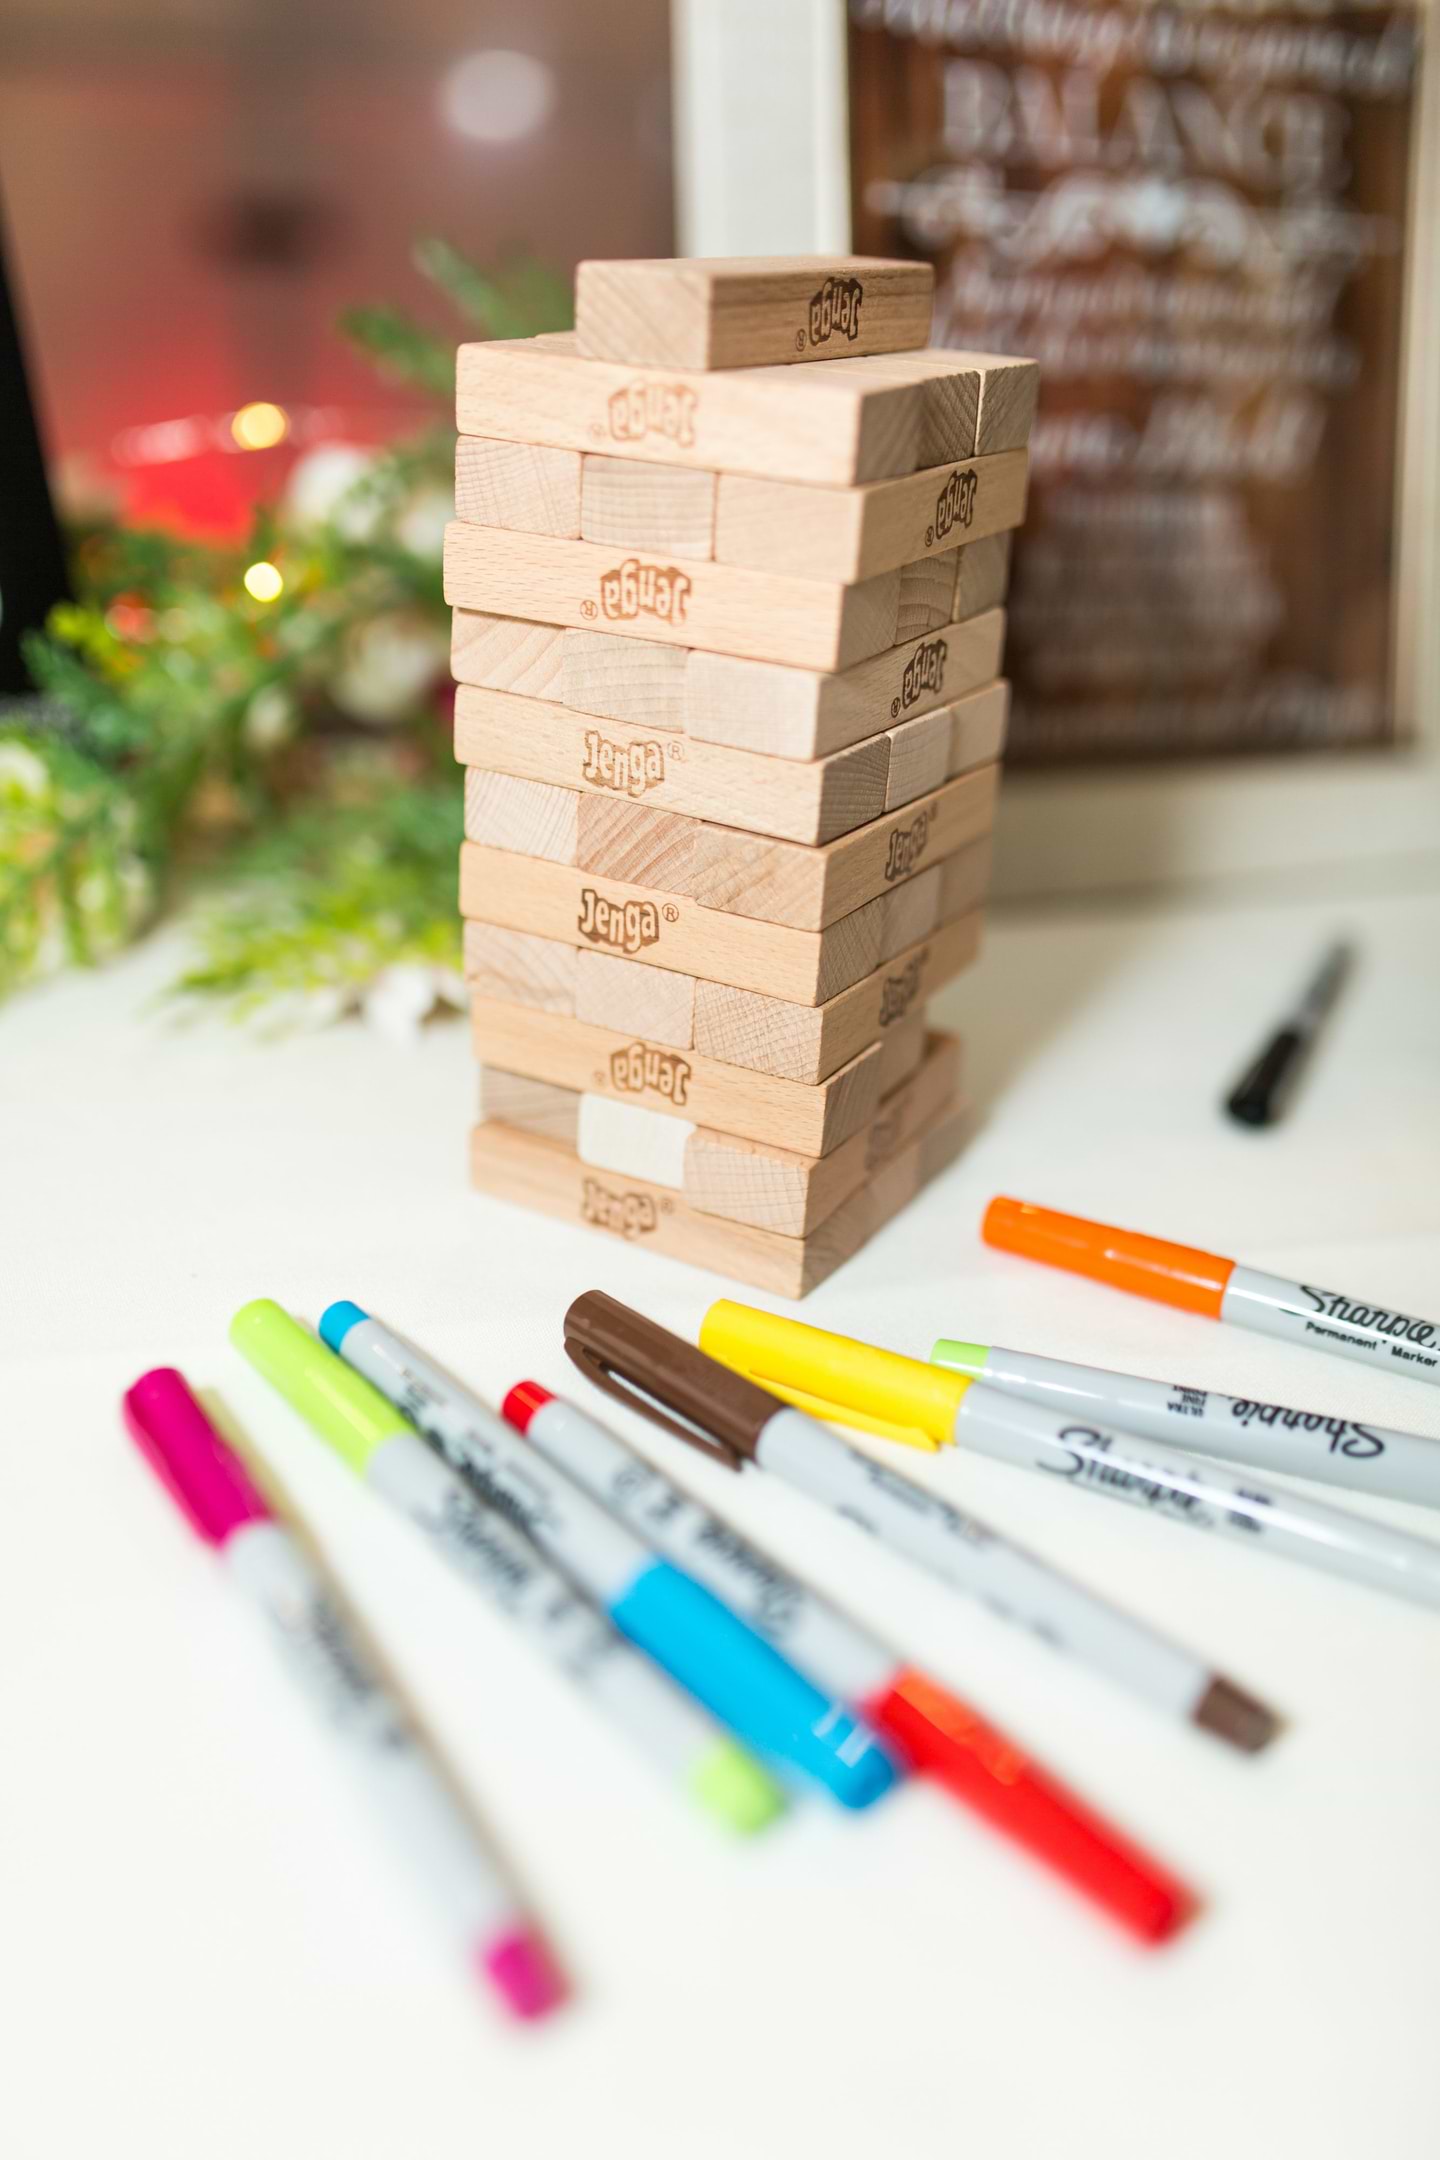 Jenga pieces used for wedding guests to sign in